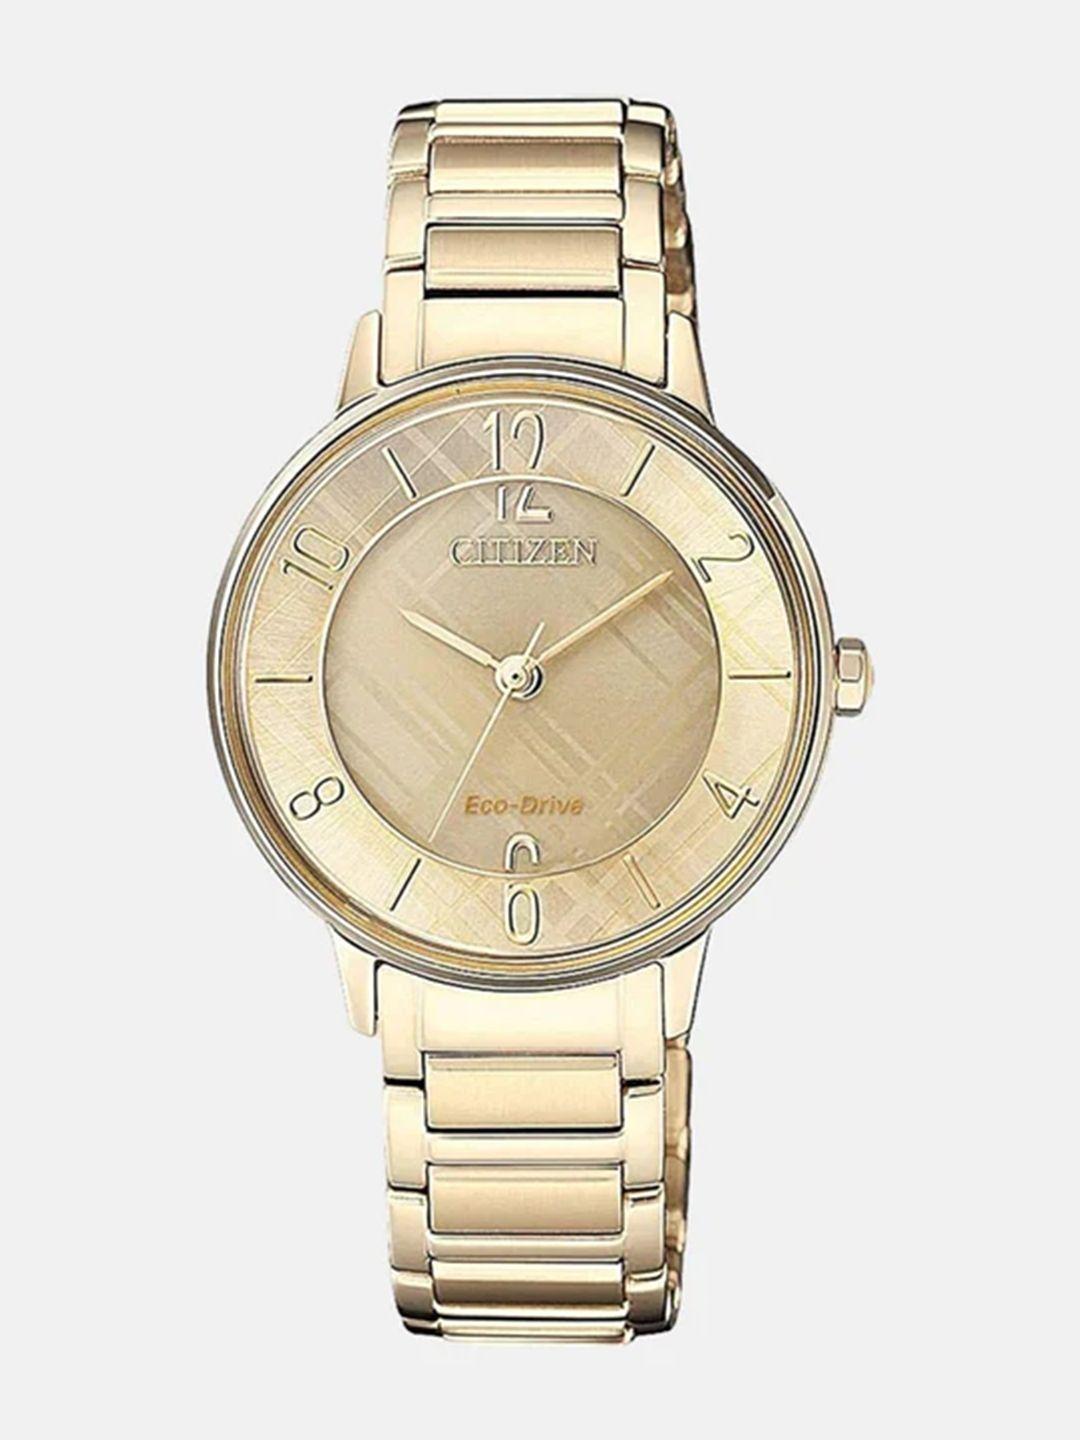 citizen women gold-toned dial & stainless steel bracelet style straps analogue watch